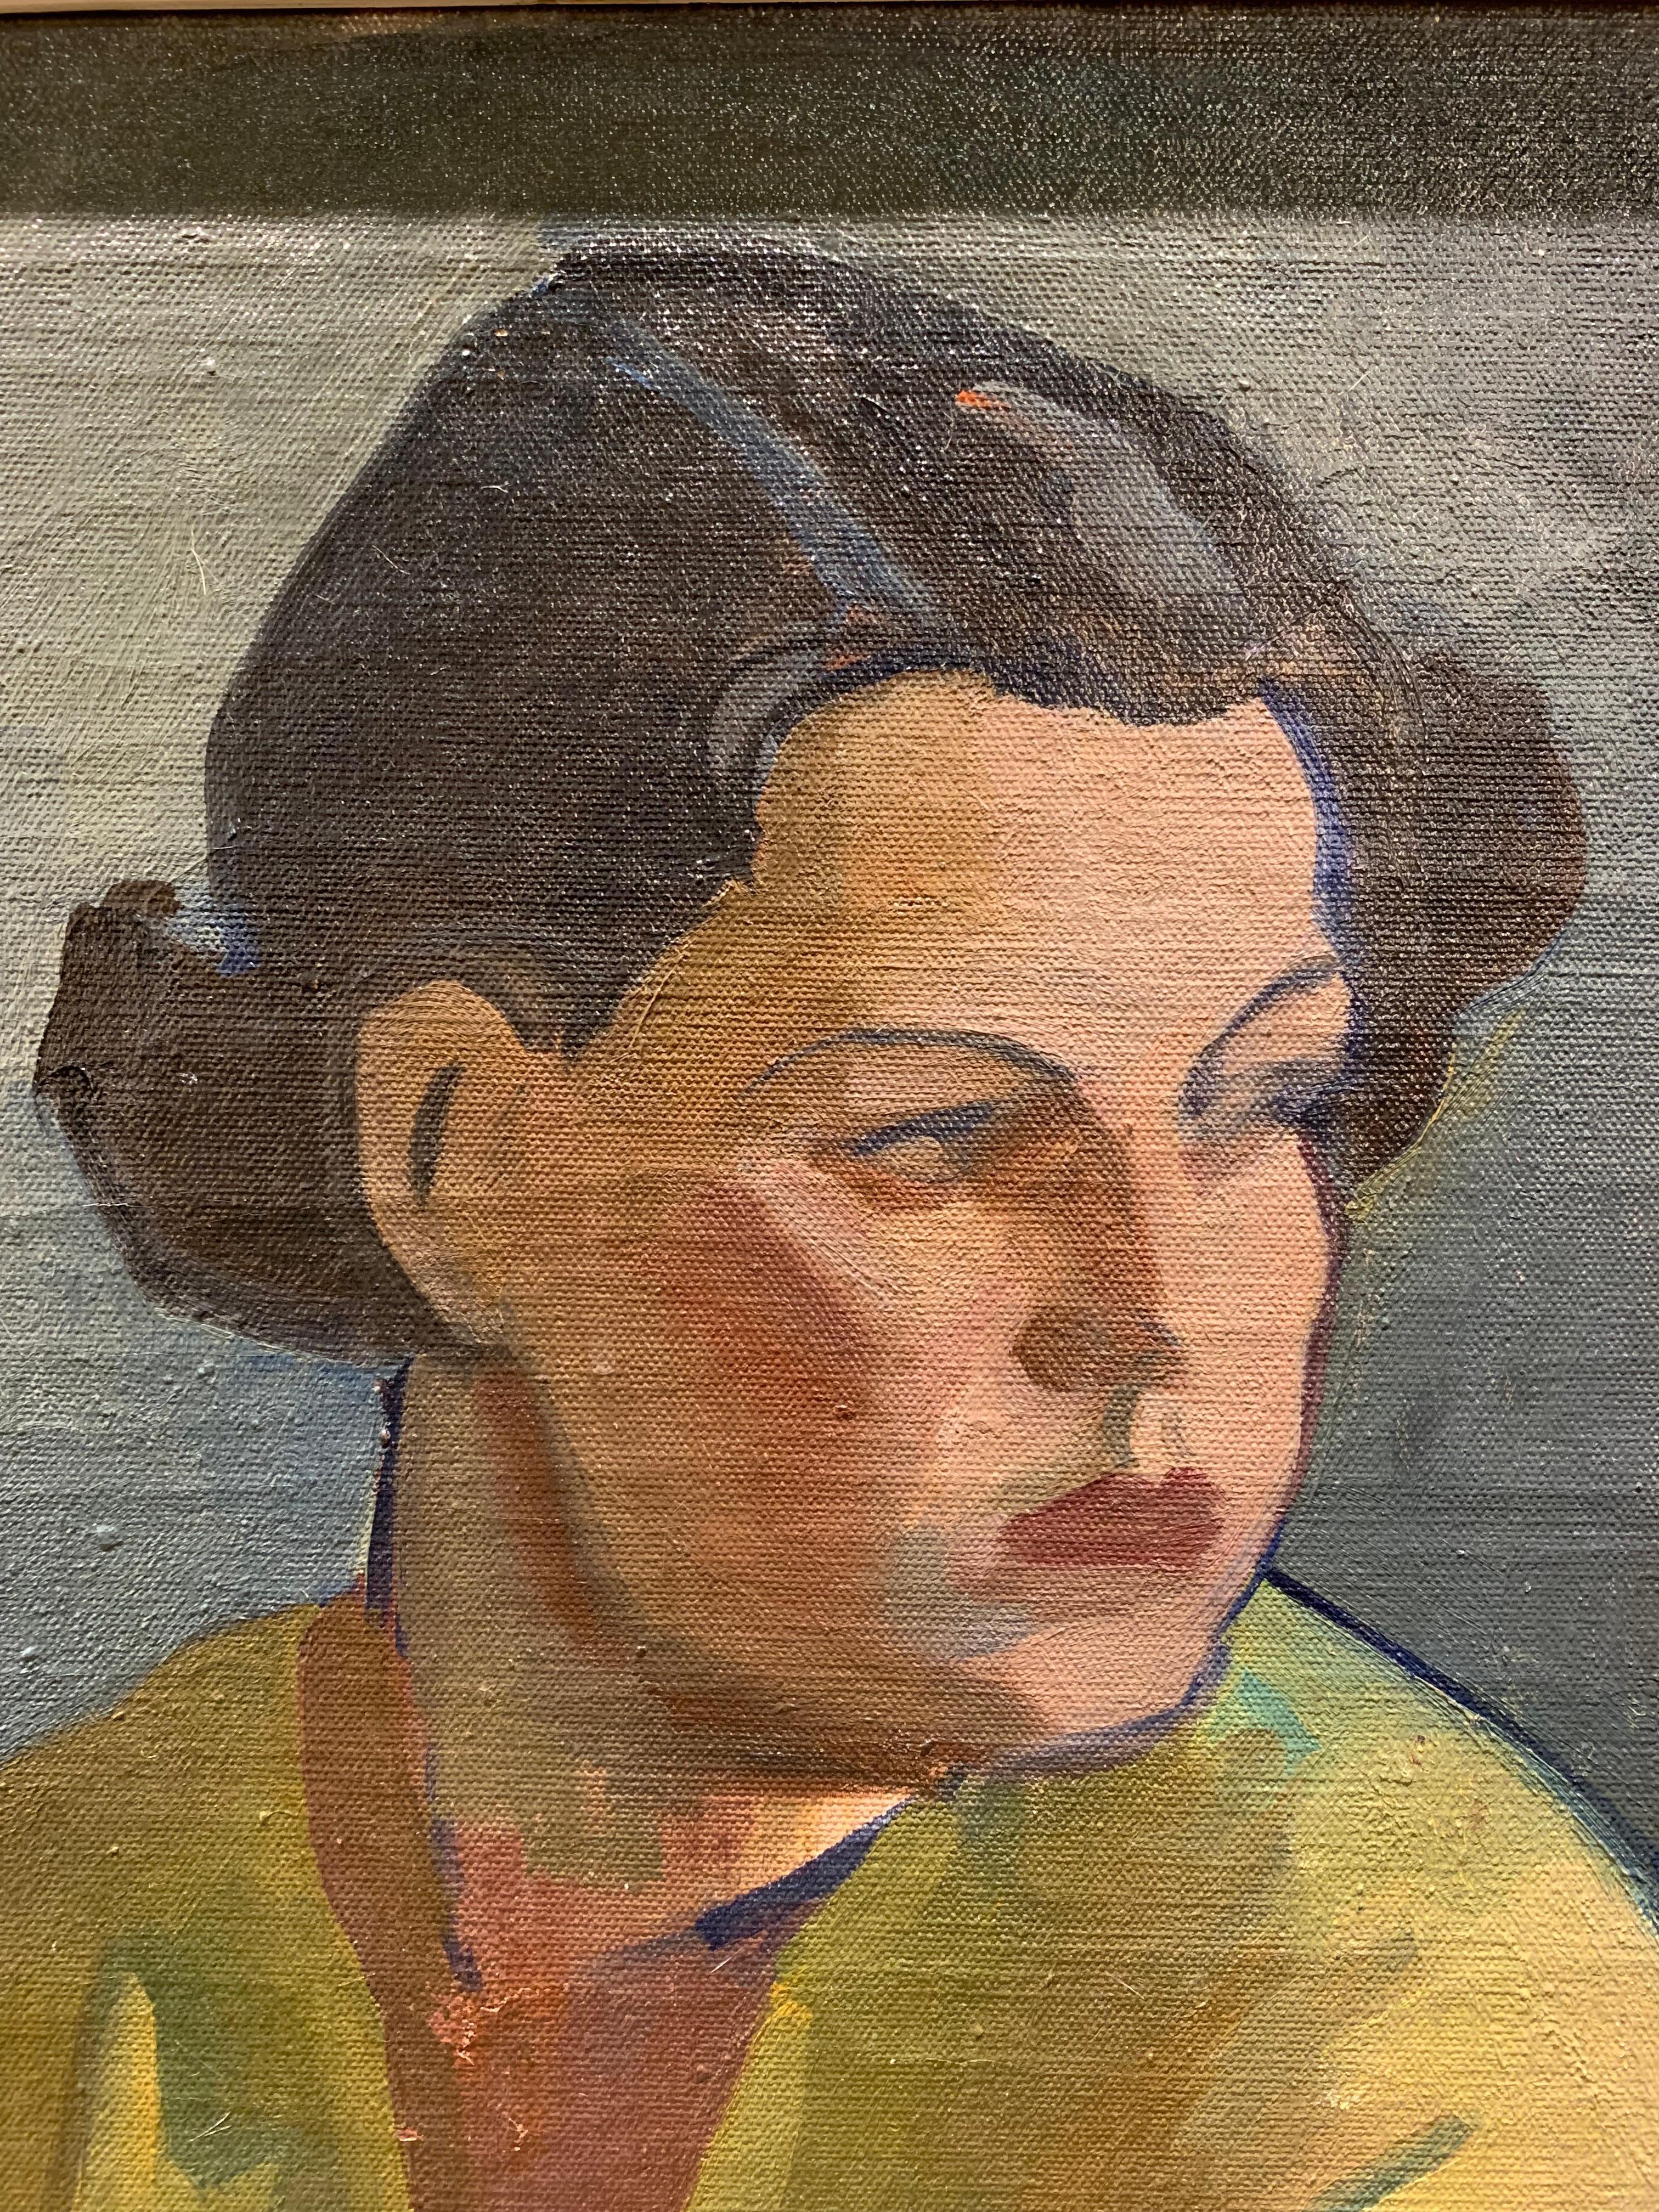 1930s Finnish 'Young Woman in a Yellow Dress' Oil on Canvas Artist Llmari Aalto In Good Condition For Sale In London, GB